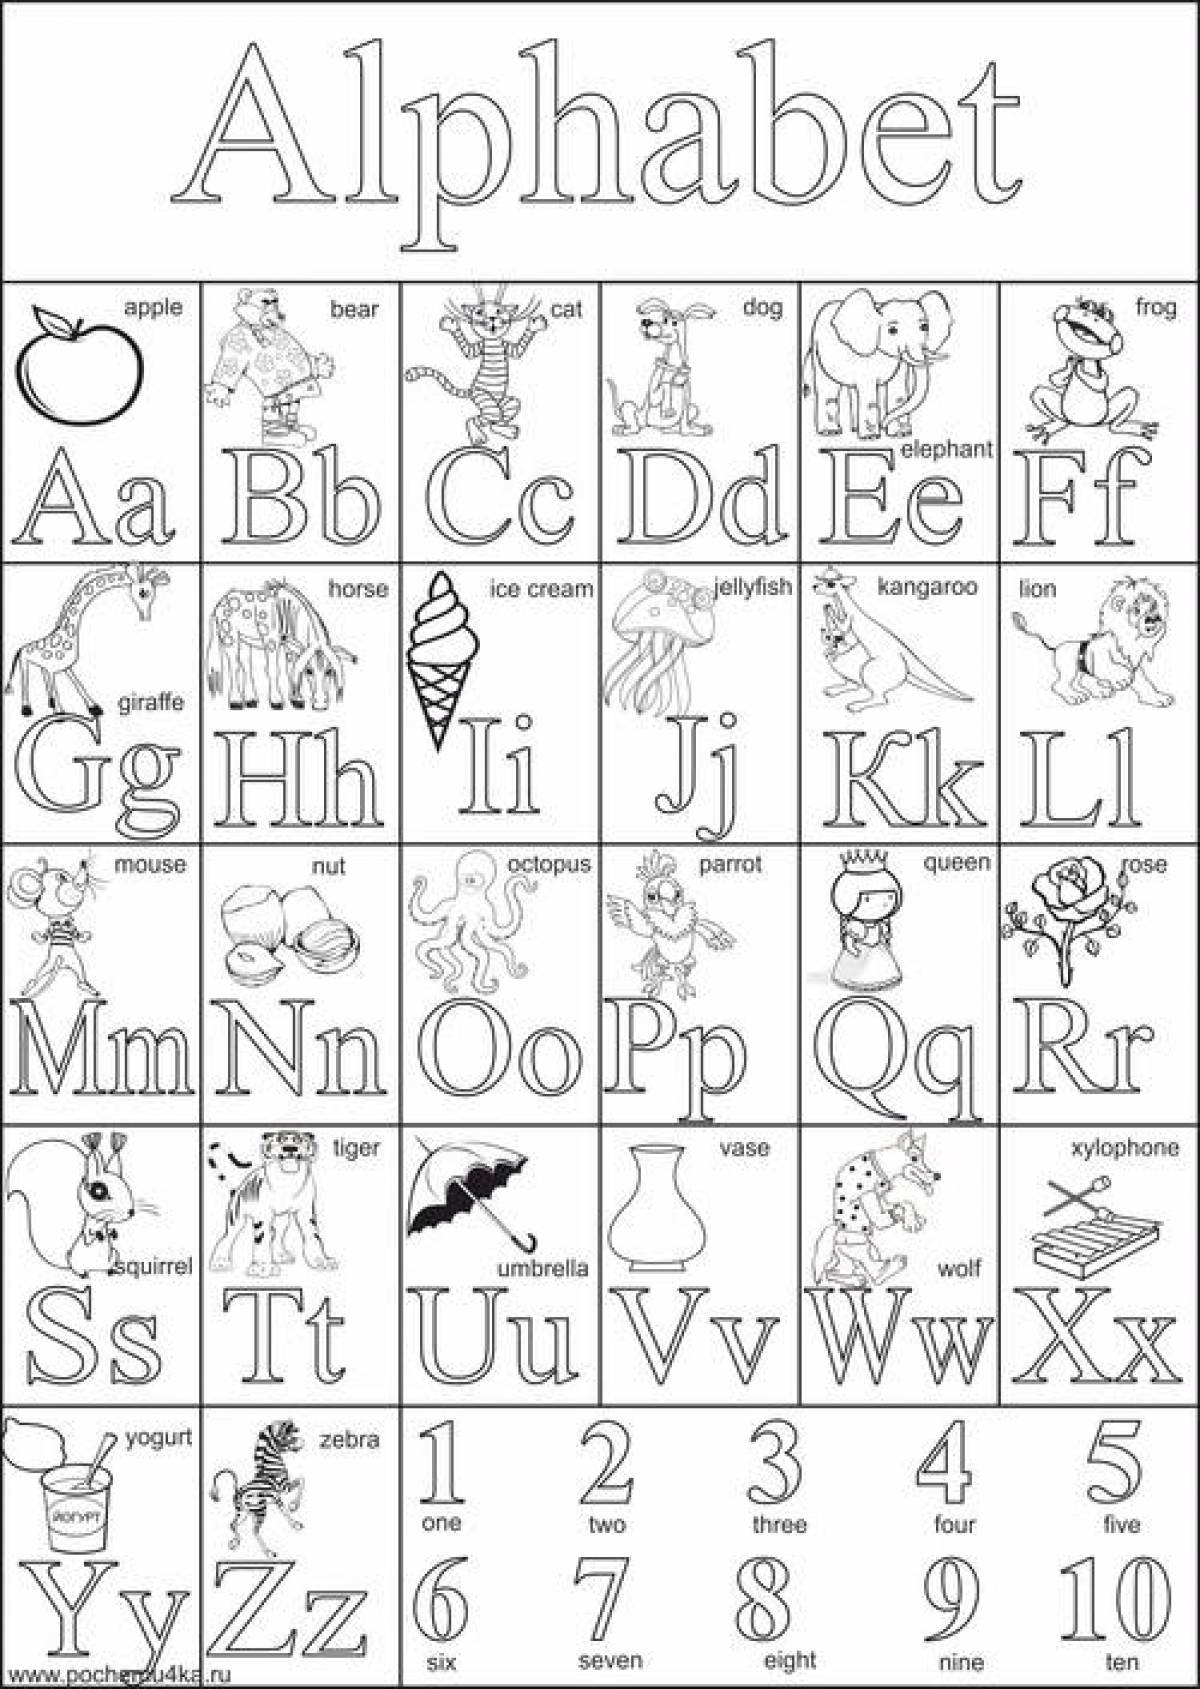 Colorful english alphabet coloring page for kids of all levels